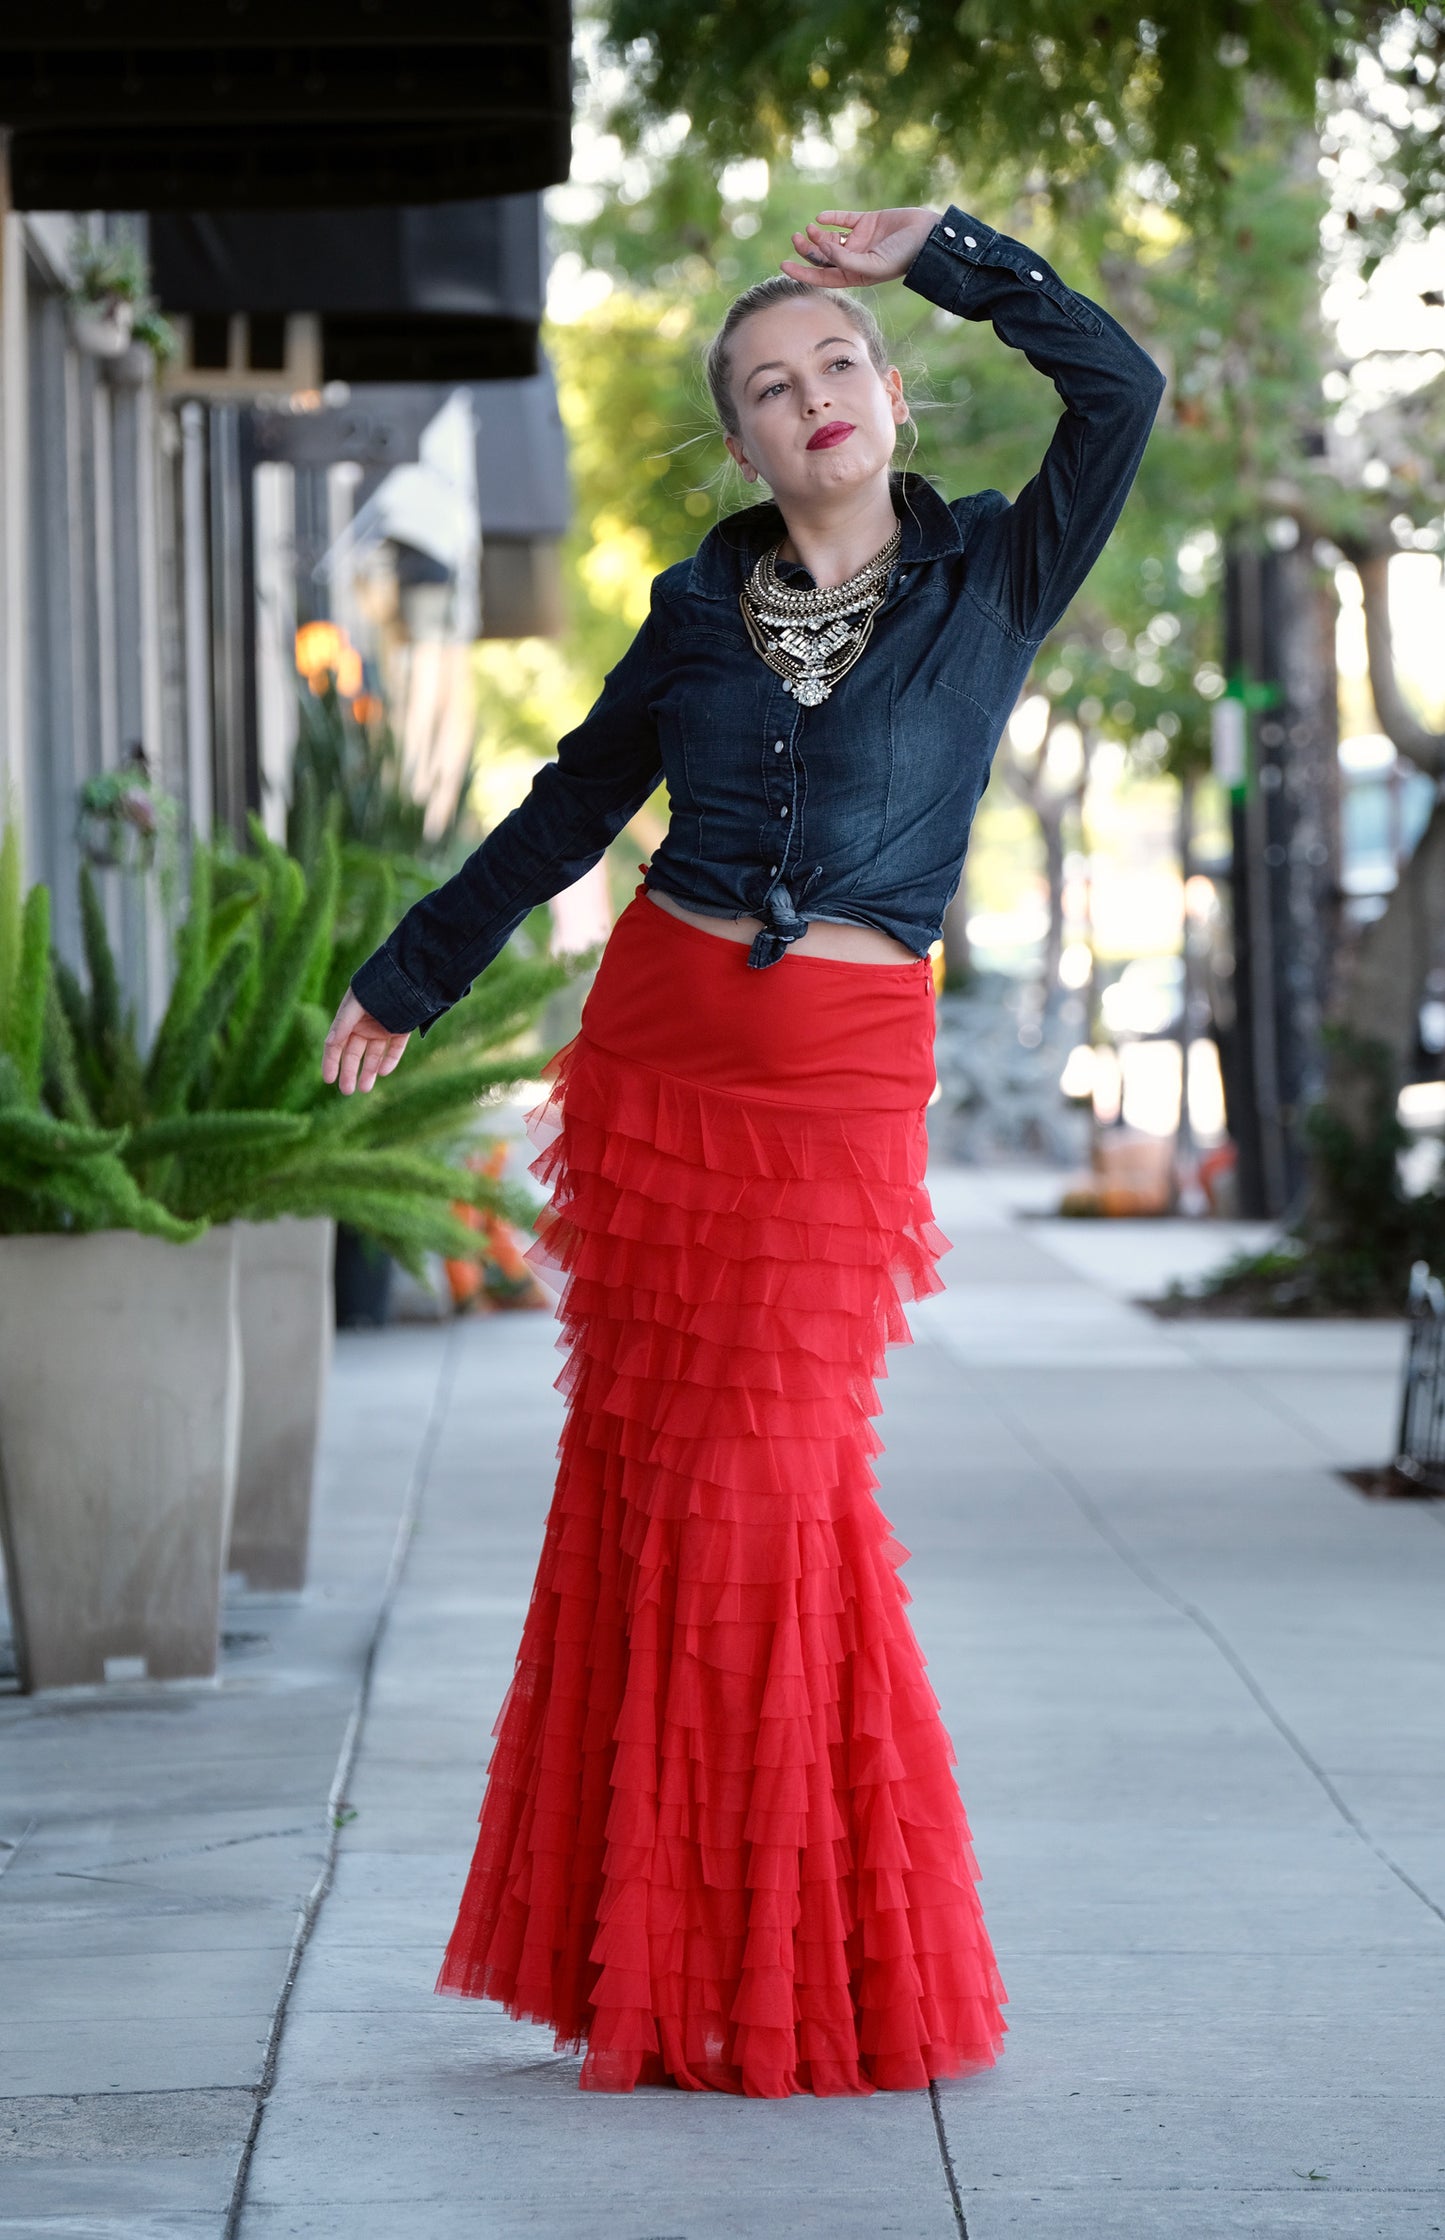 The Ariel Skirt in Red